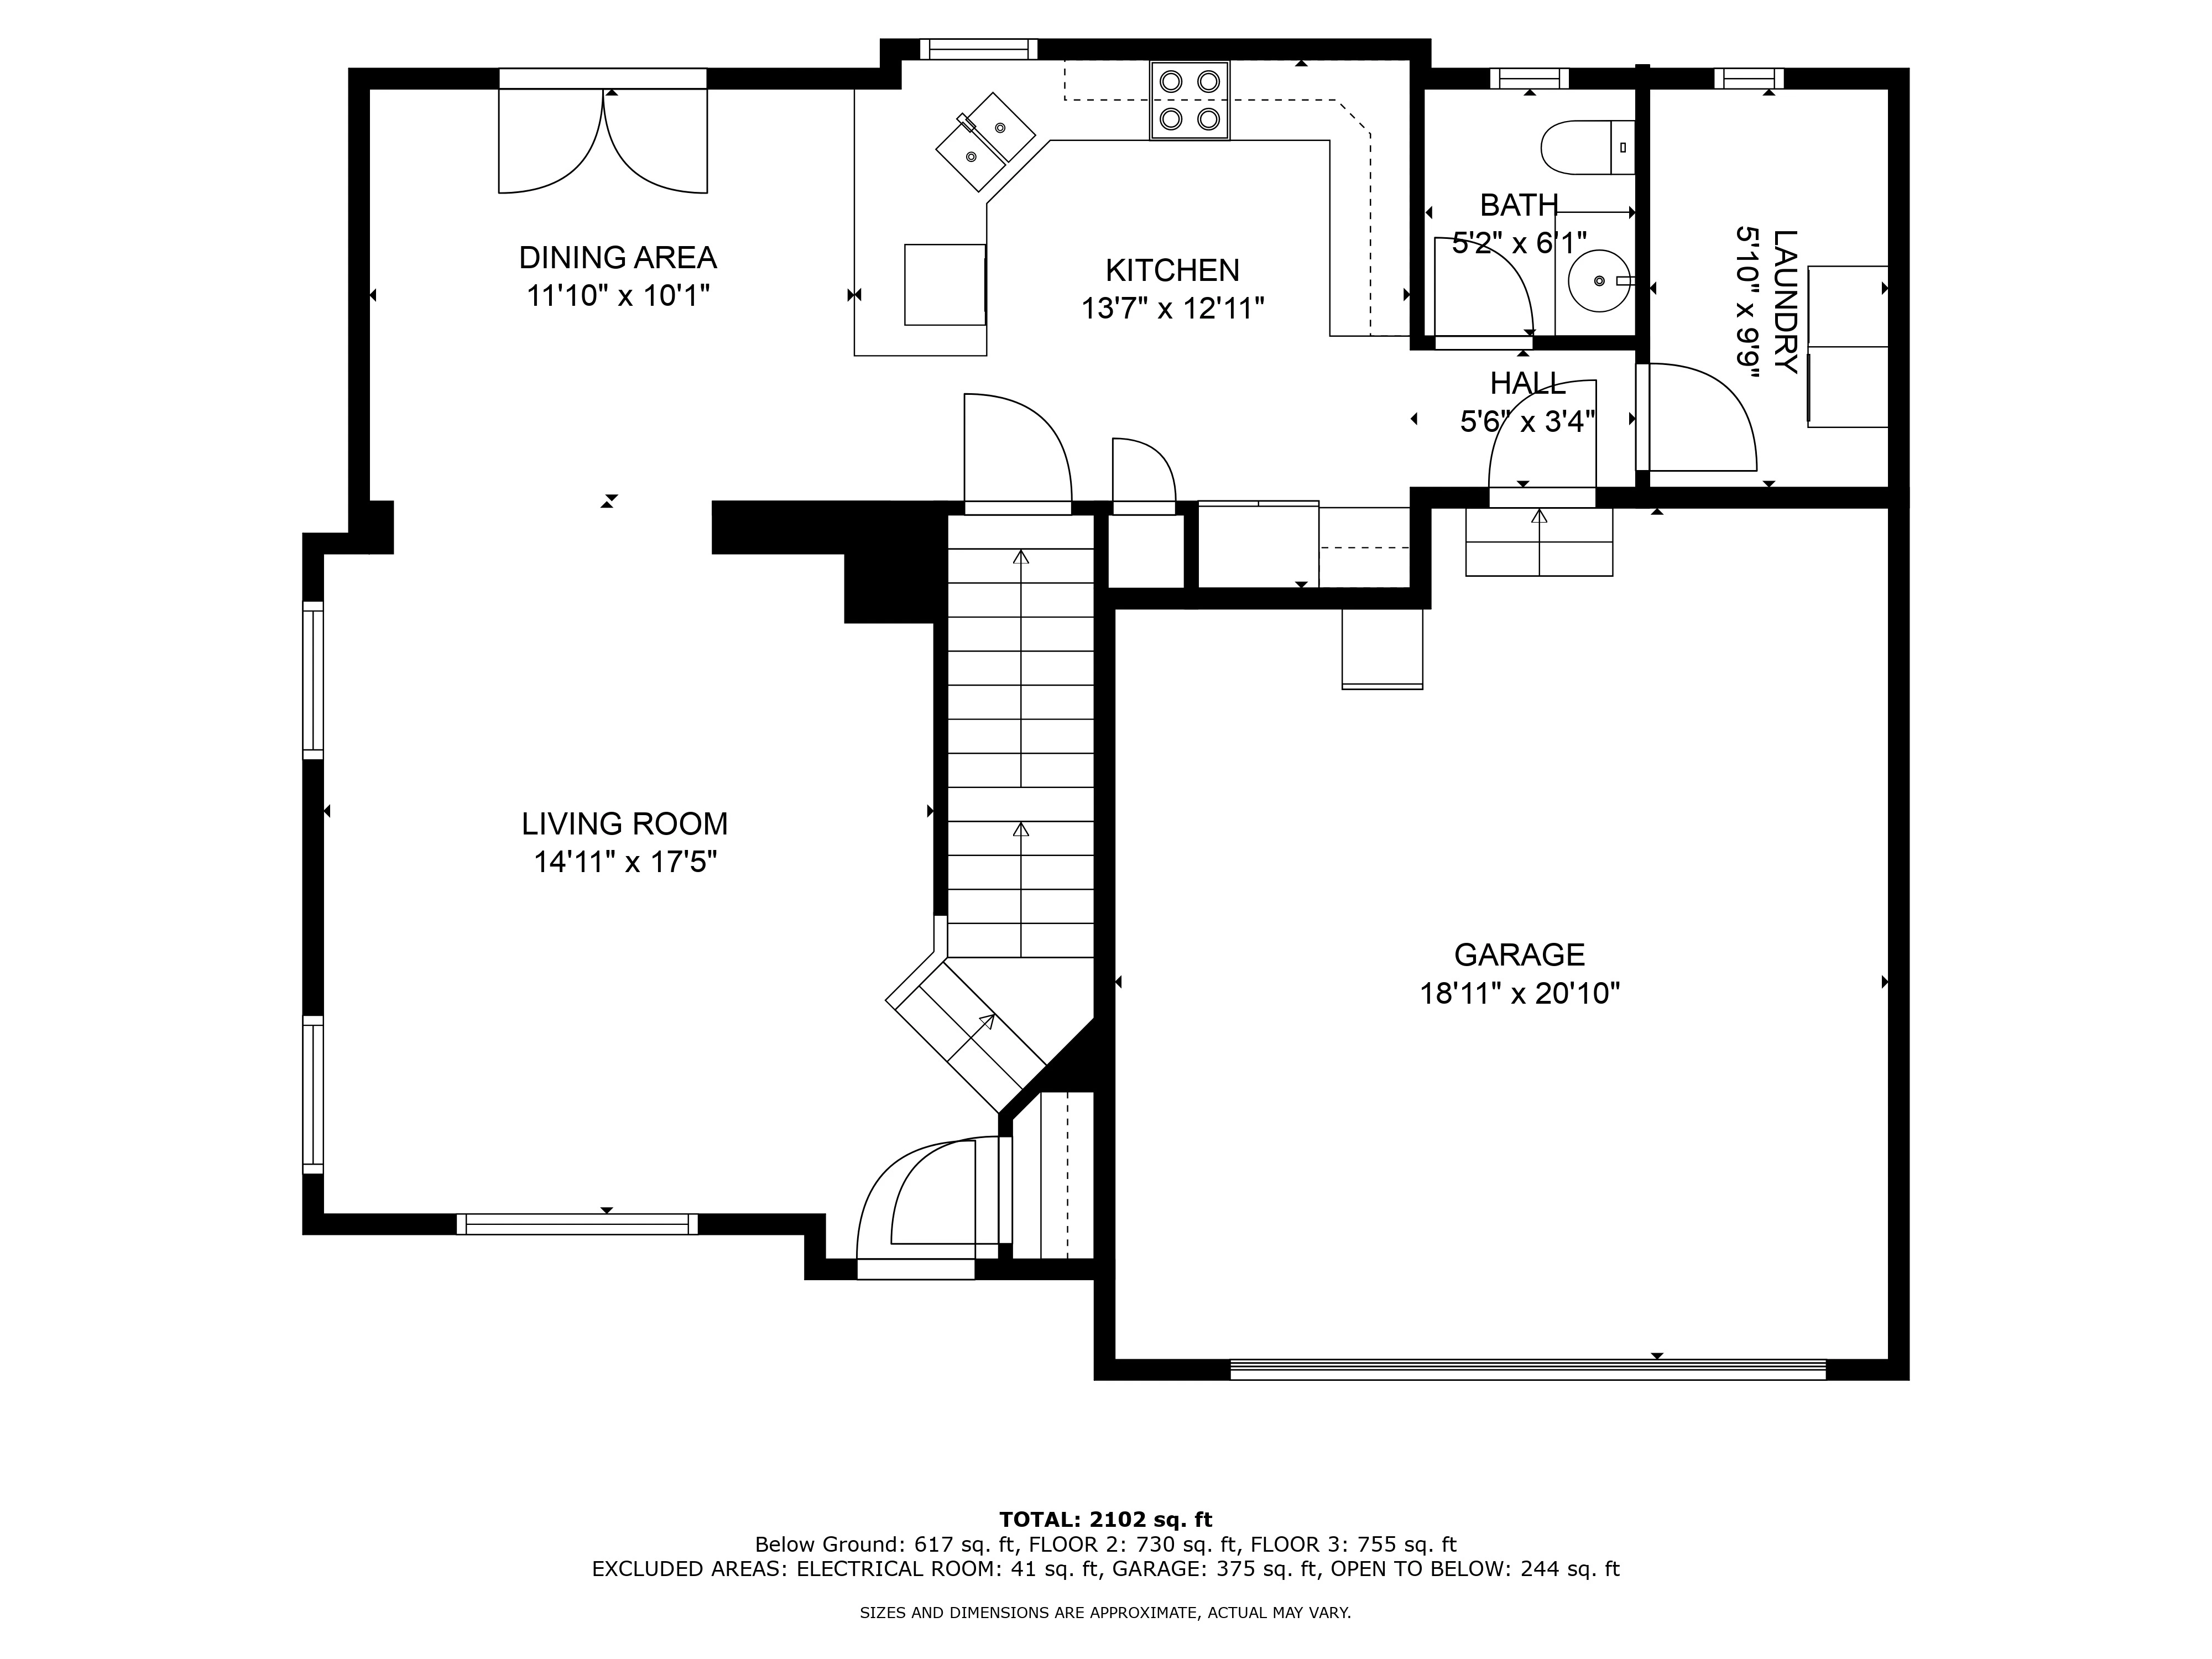 Floor Plan with Fixed Furniture for Real Estaete